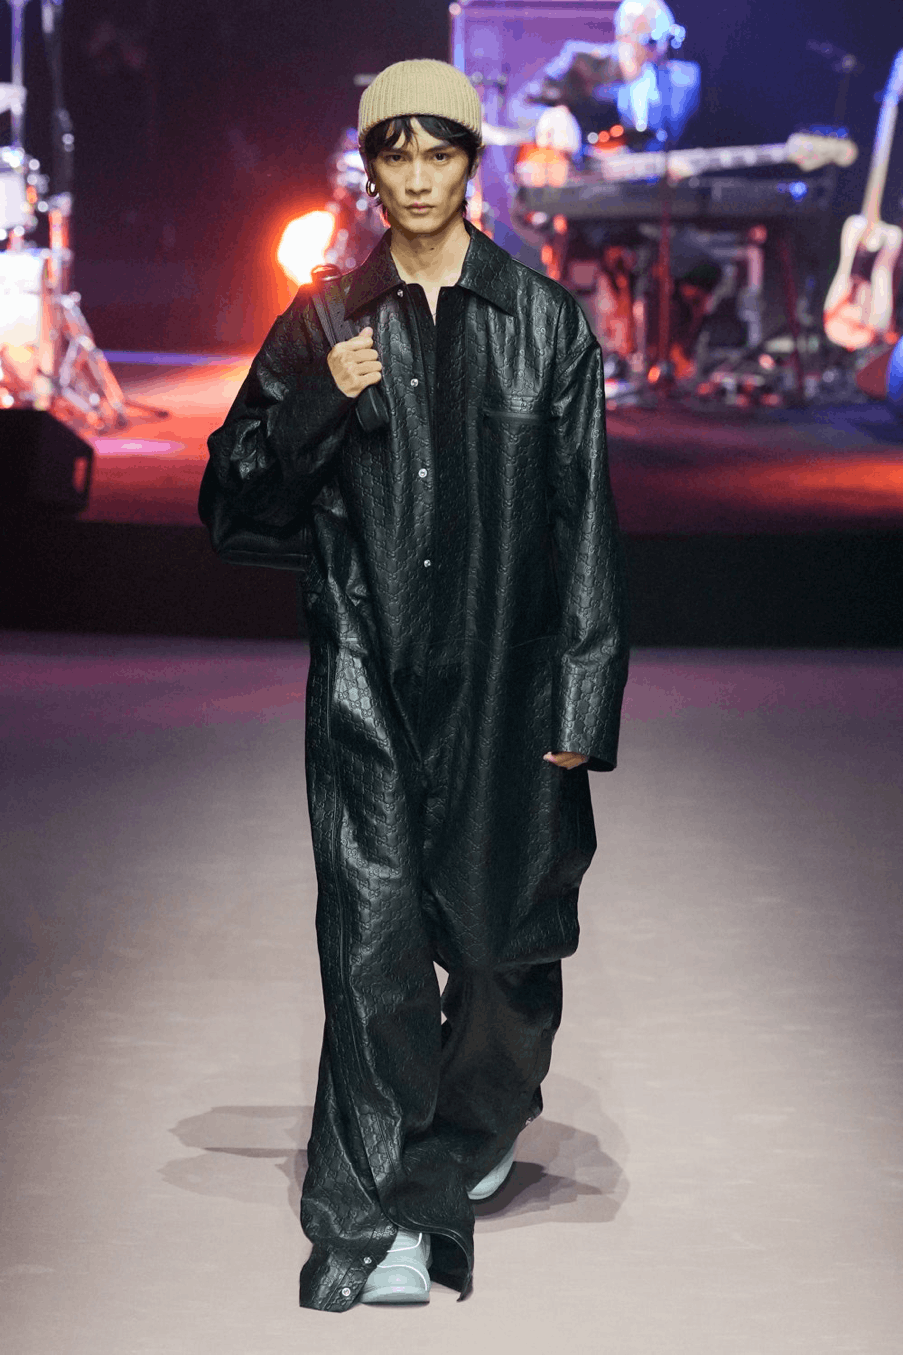 solo performance person performer man adult male coat standing guitar fashion